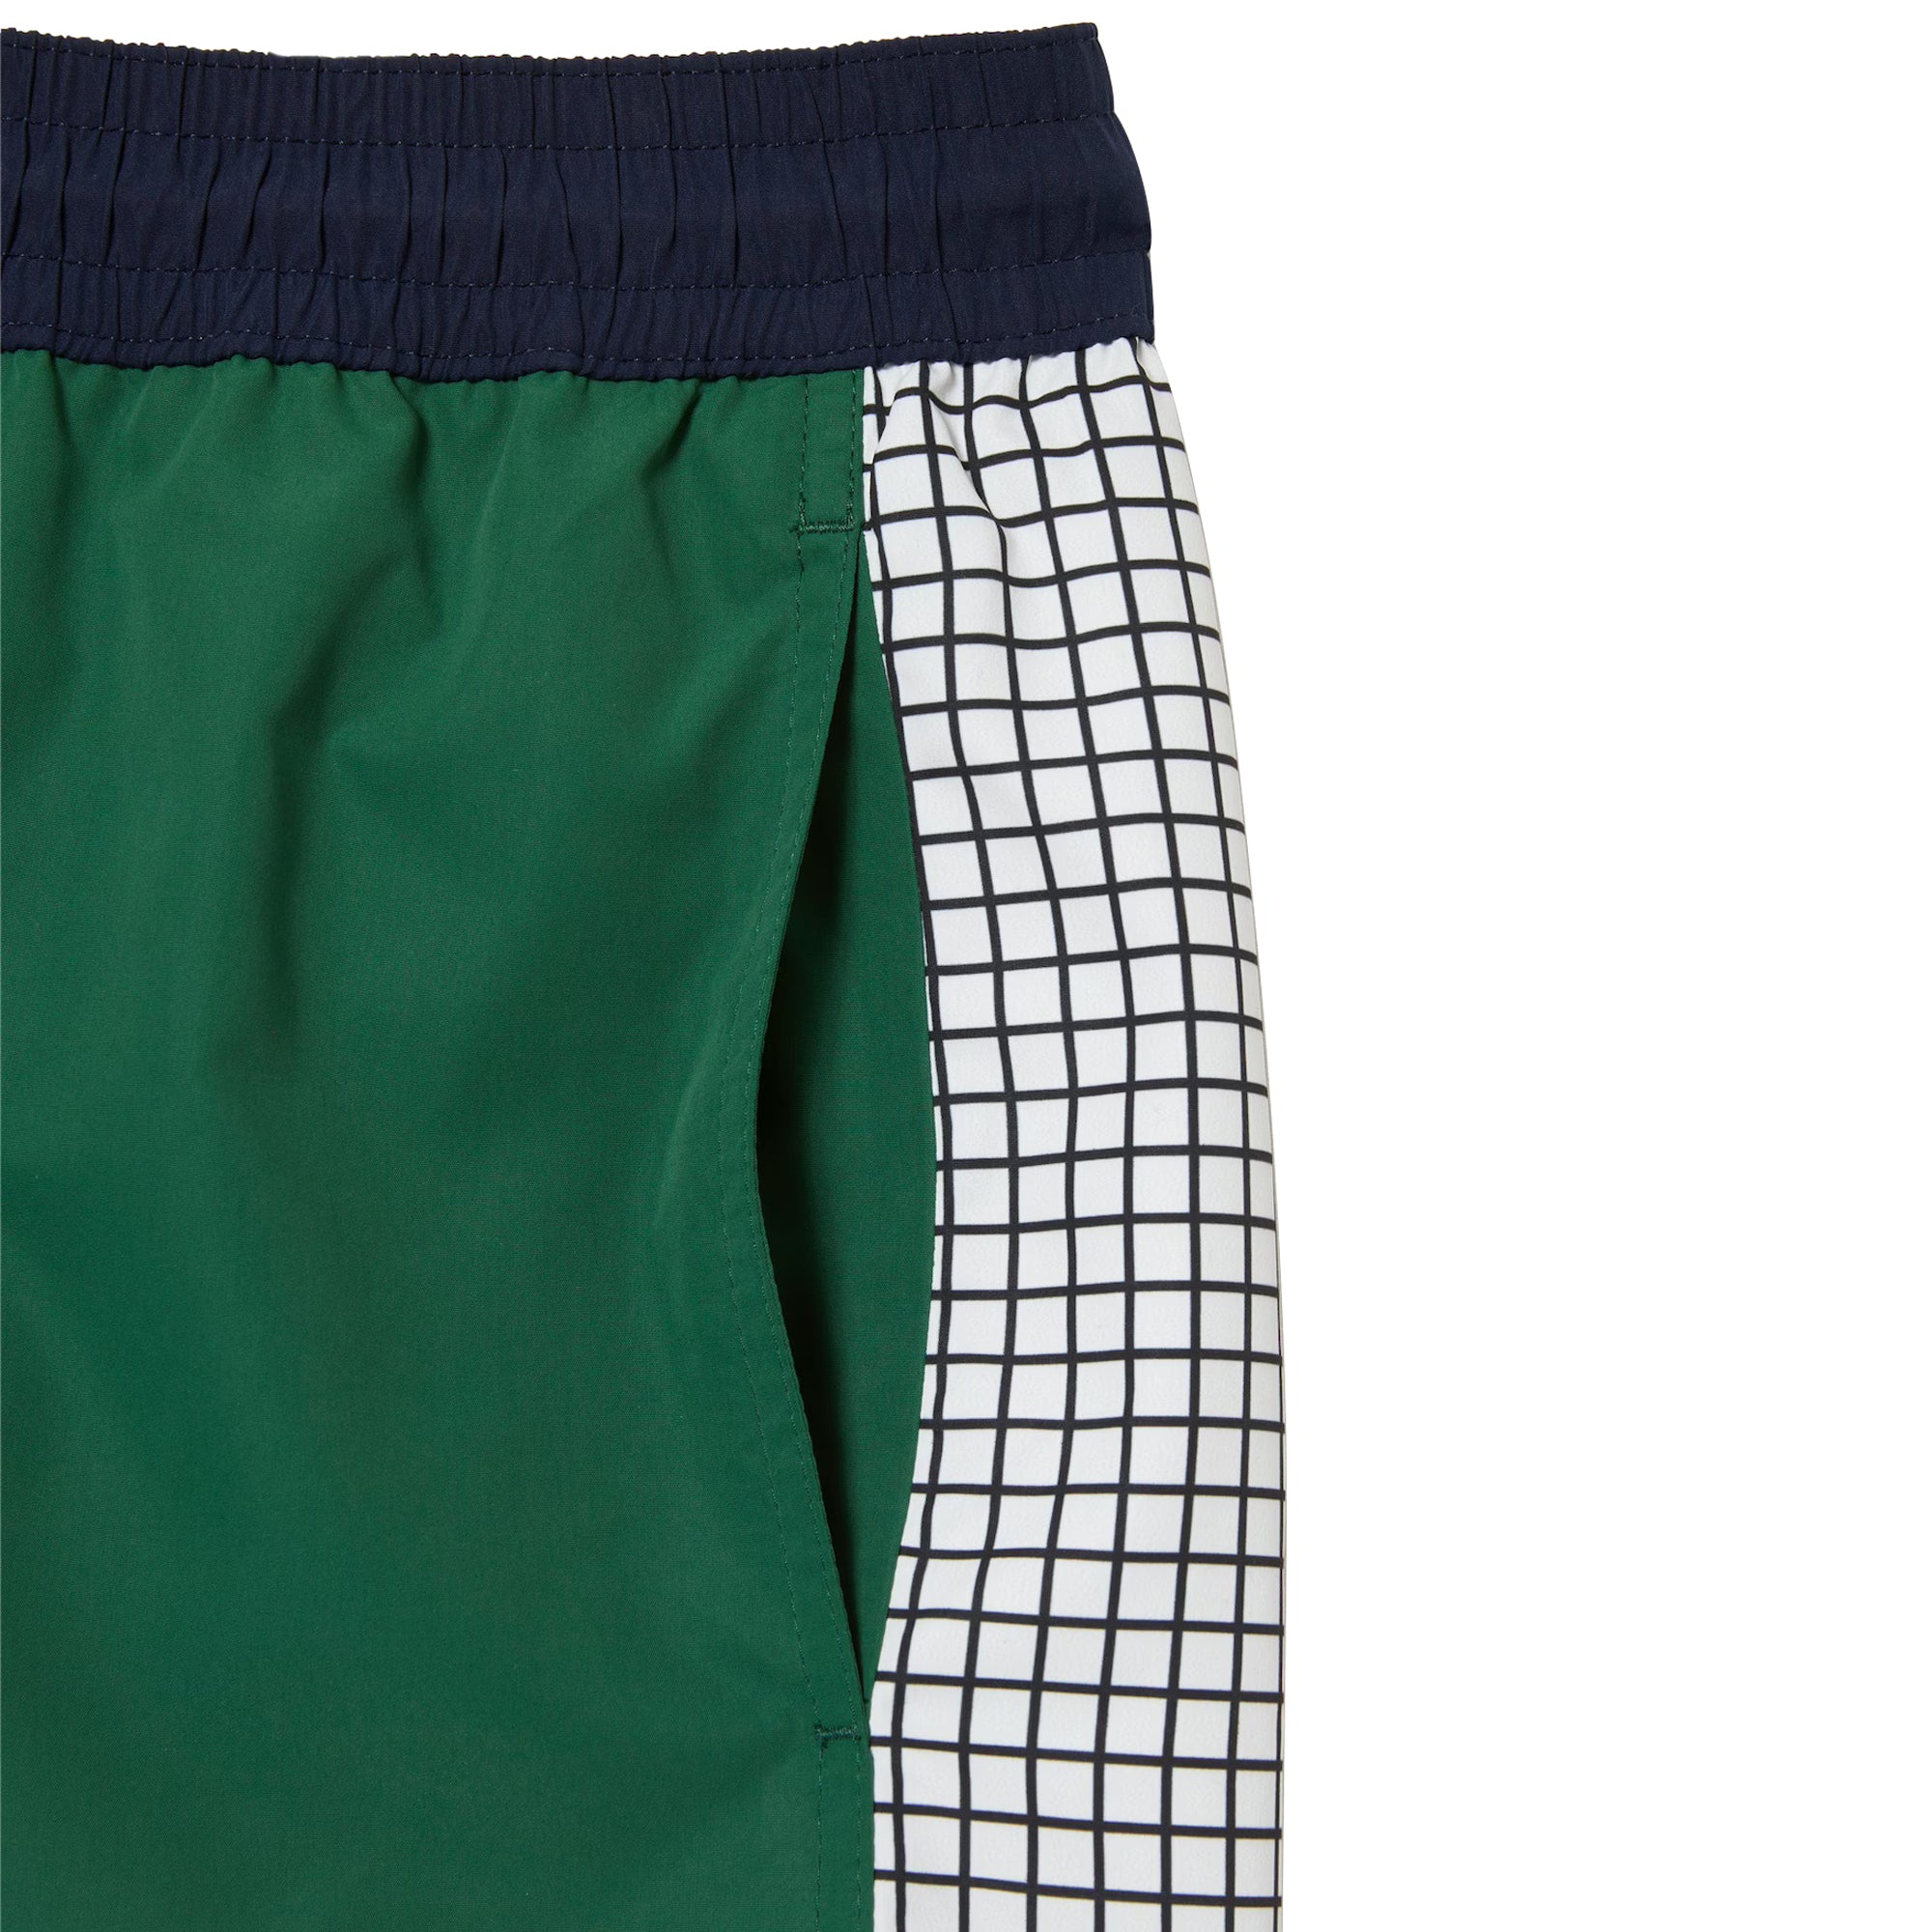 Lacoste Mens Recycled Polyester Colorblock Swim Trunks